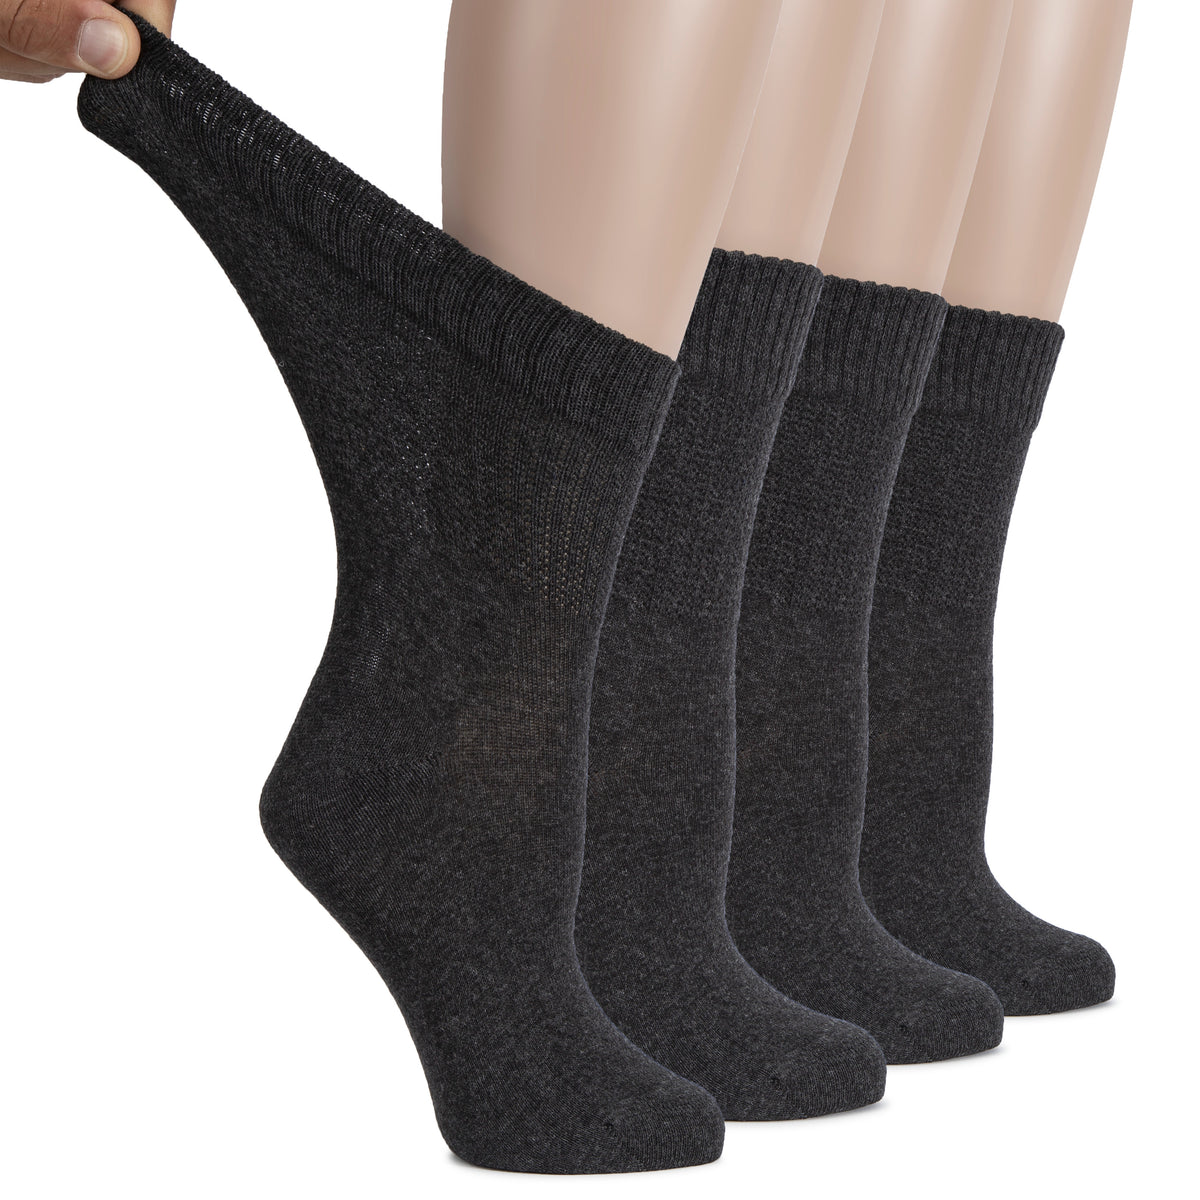 The image shows Women's Diabetic Cotton Crew Socks, with one leg in the air, designed to offer comfort and support to women with diabetes.